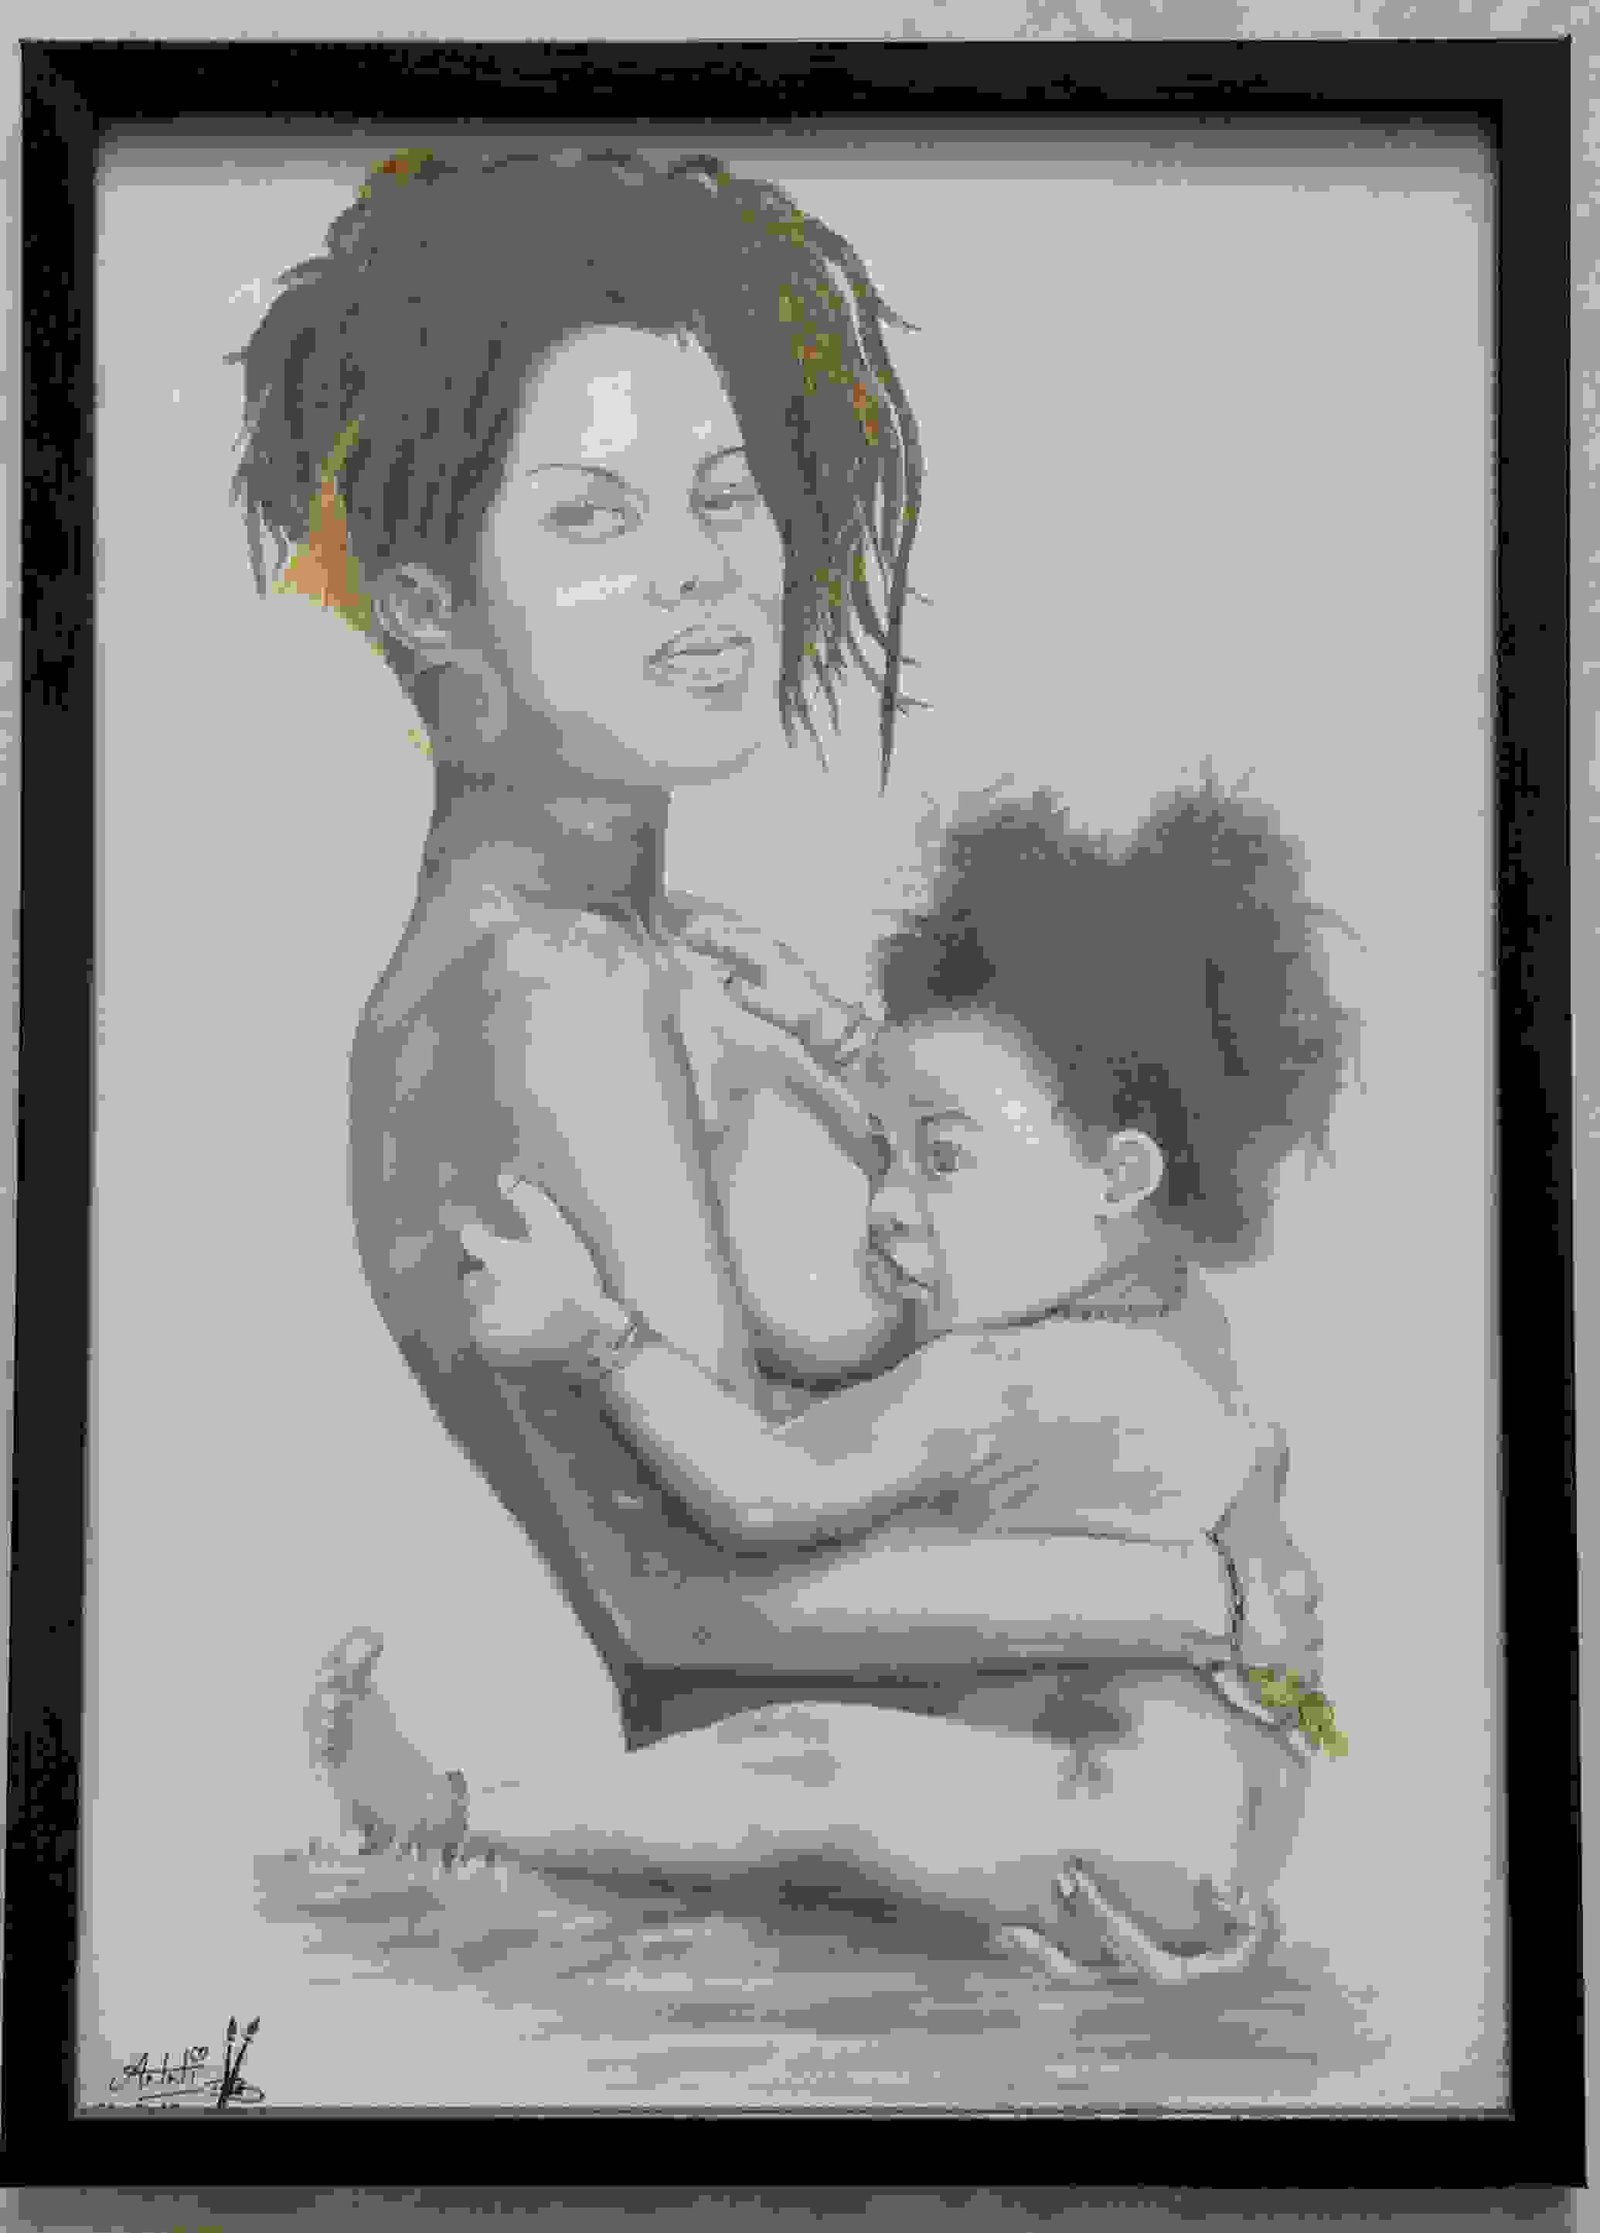 Painting Of Child With Mother In Pencile Sketch Size A3